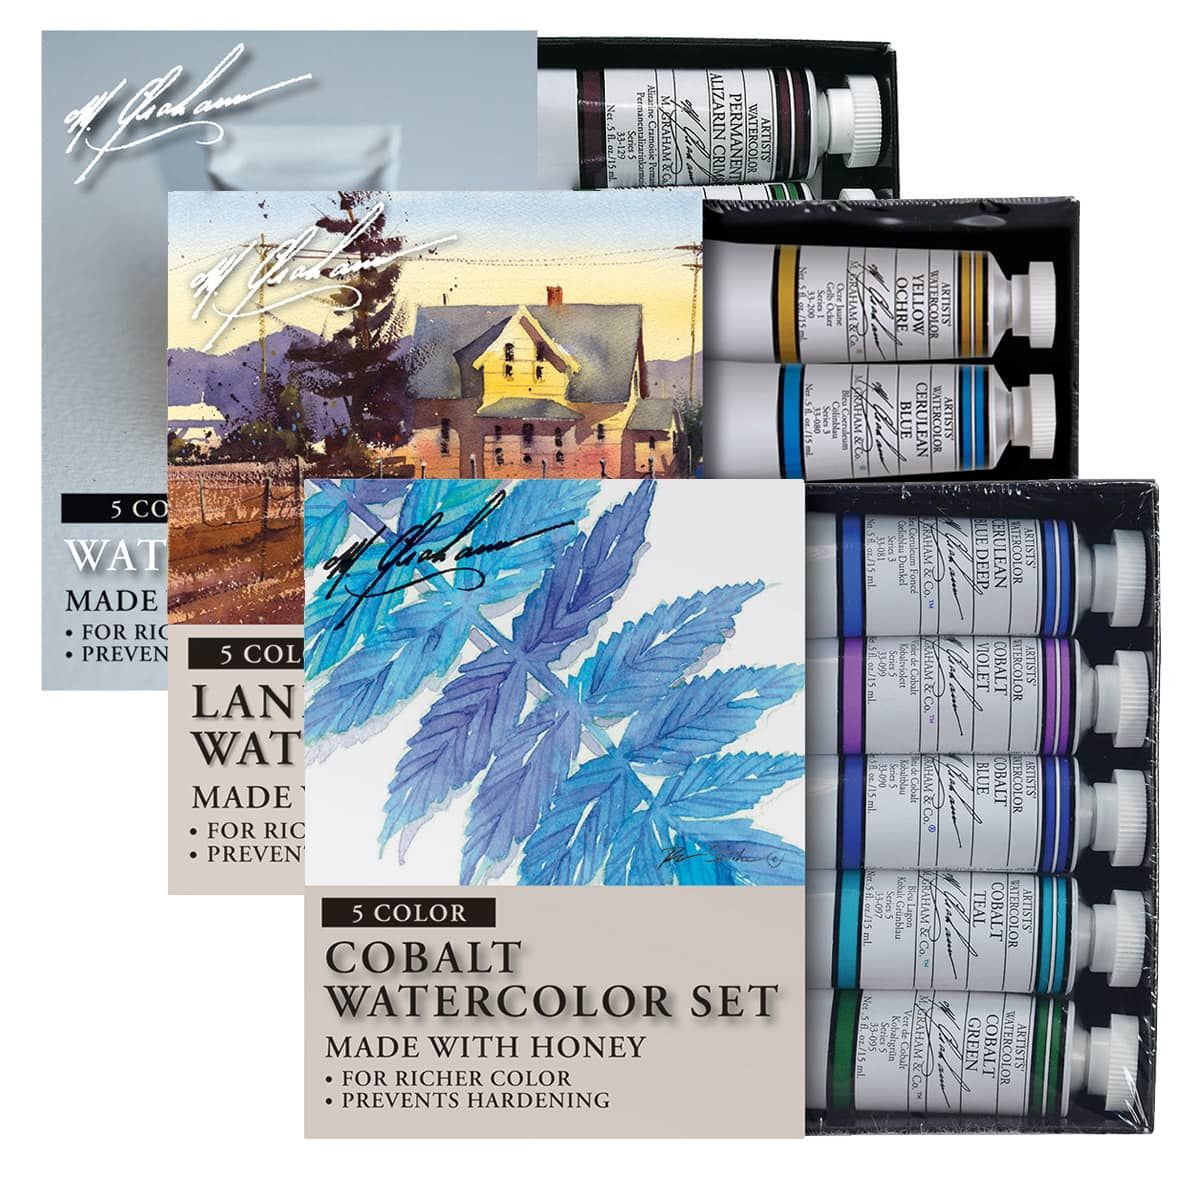 M. Graham Basic 5-Color Watercolor Set Review: Fun for Experienced